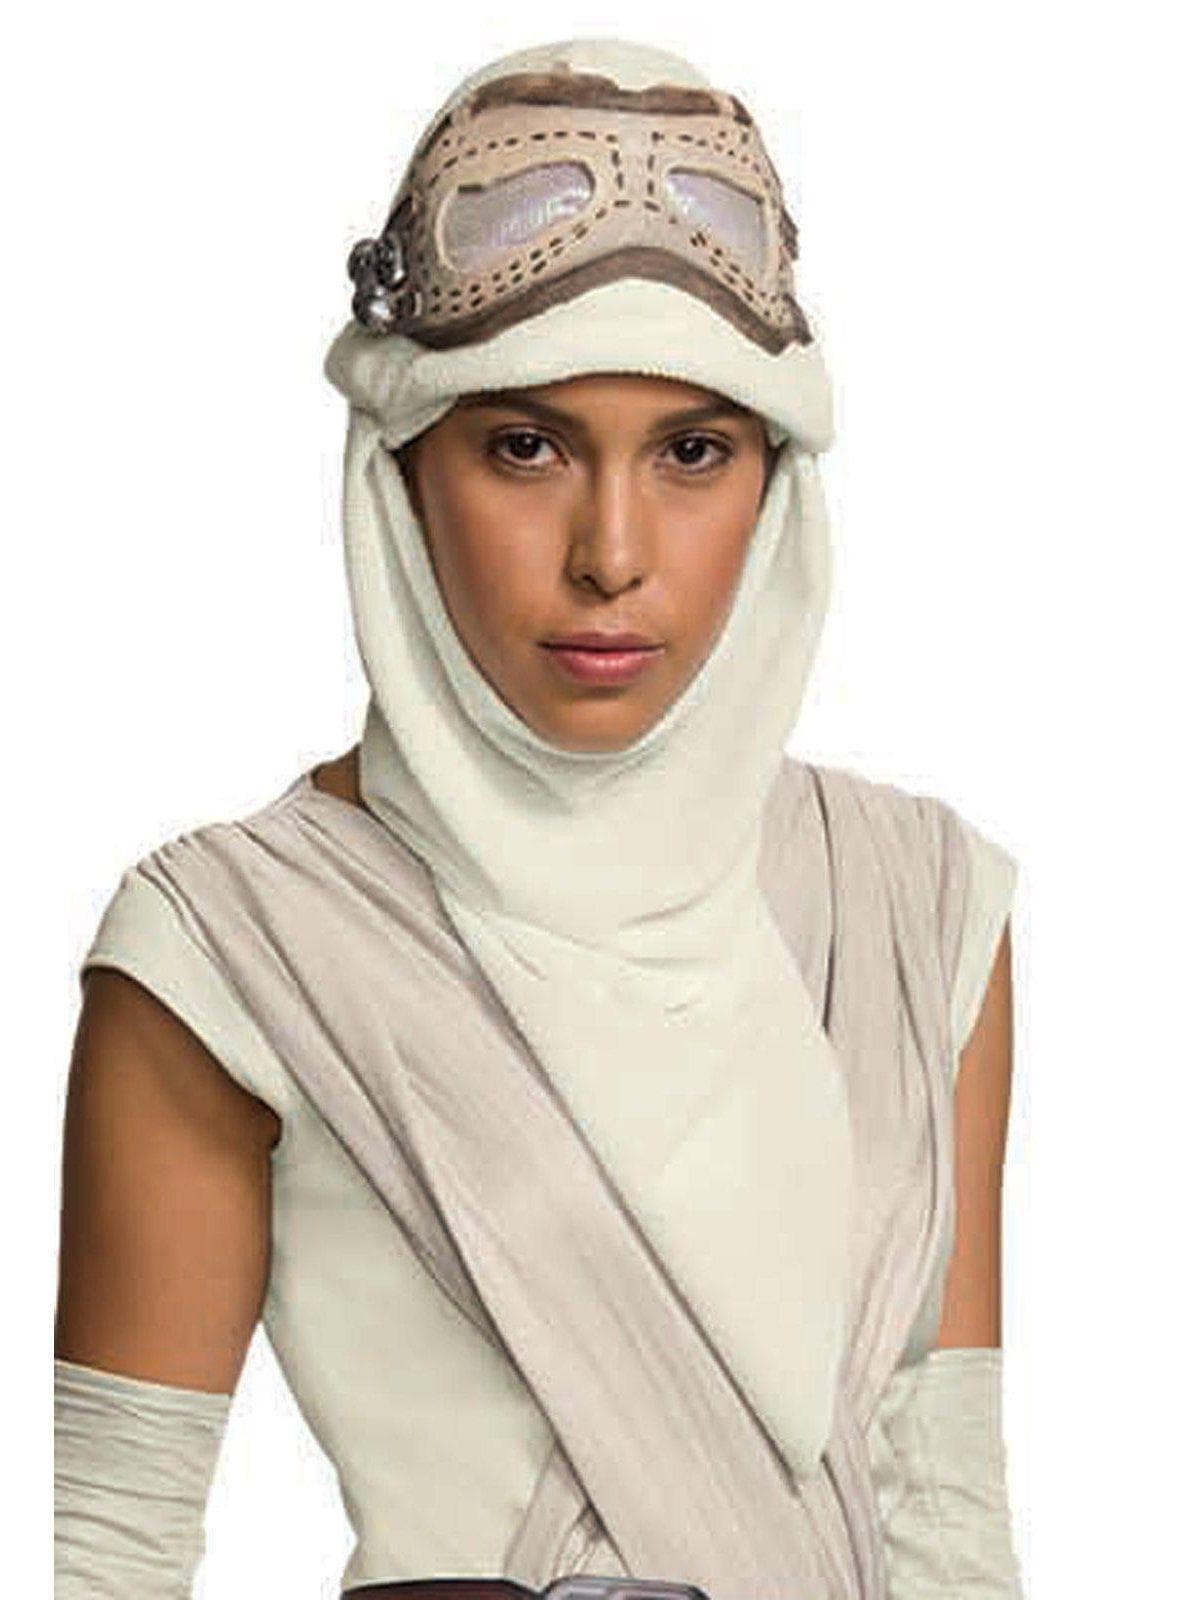 Women's Star Wars: The Force Awakens Rey Eye Mask with Hood - costumes.com